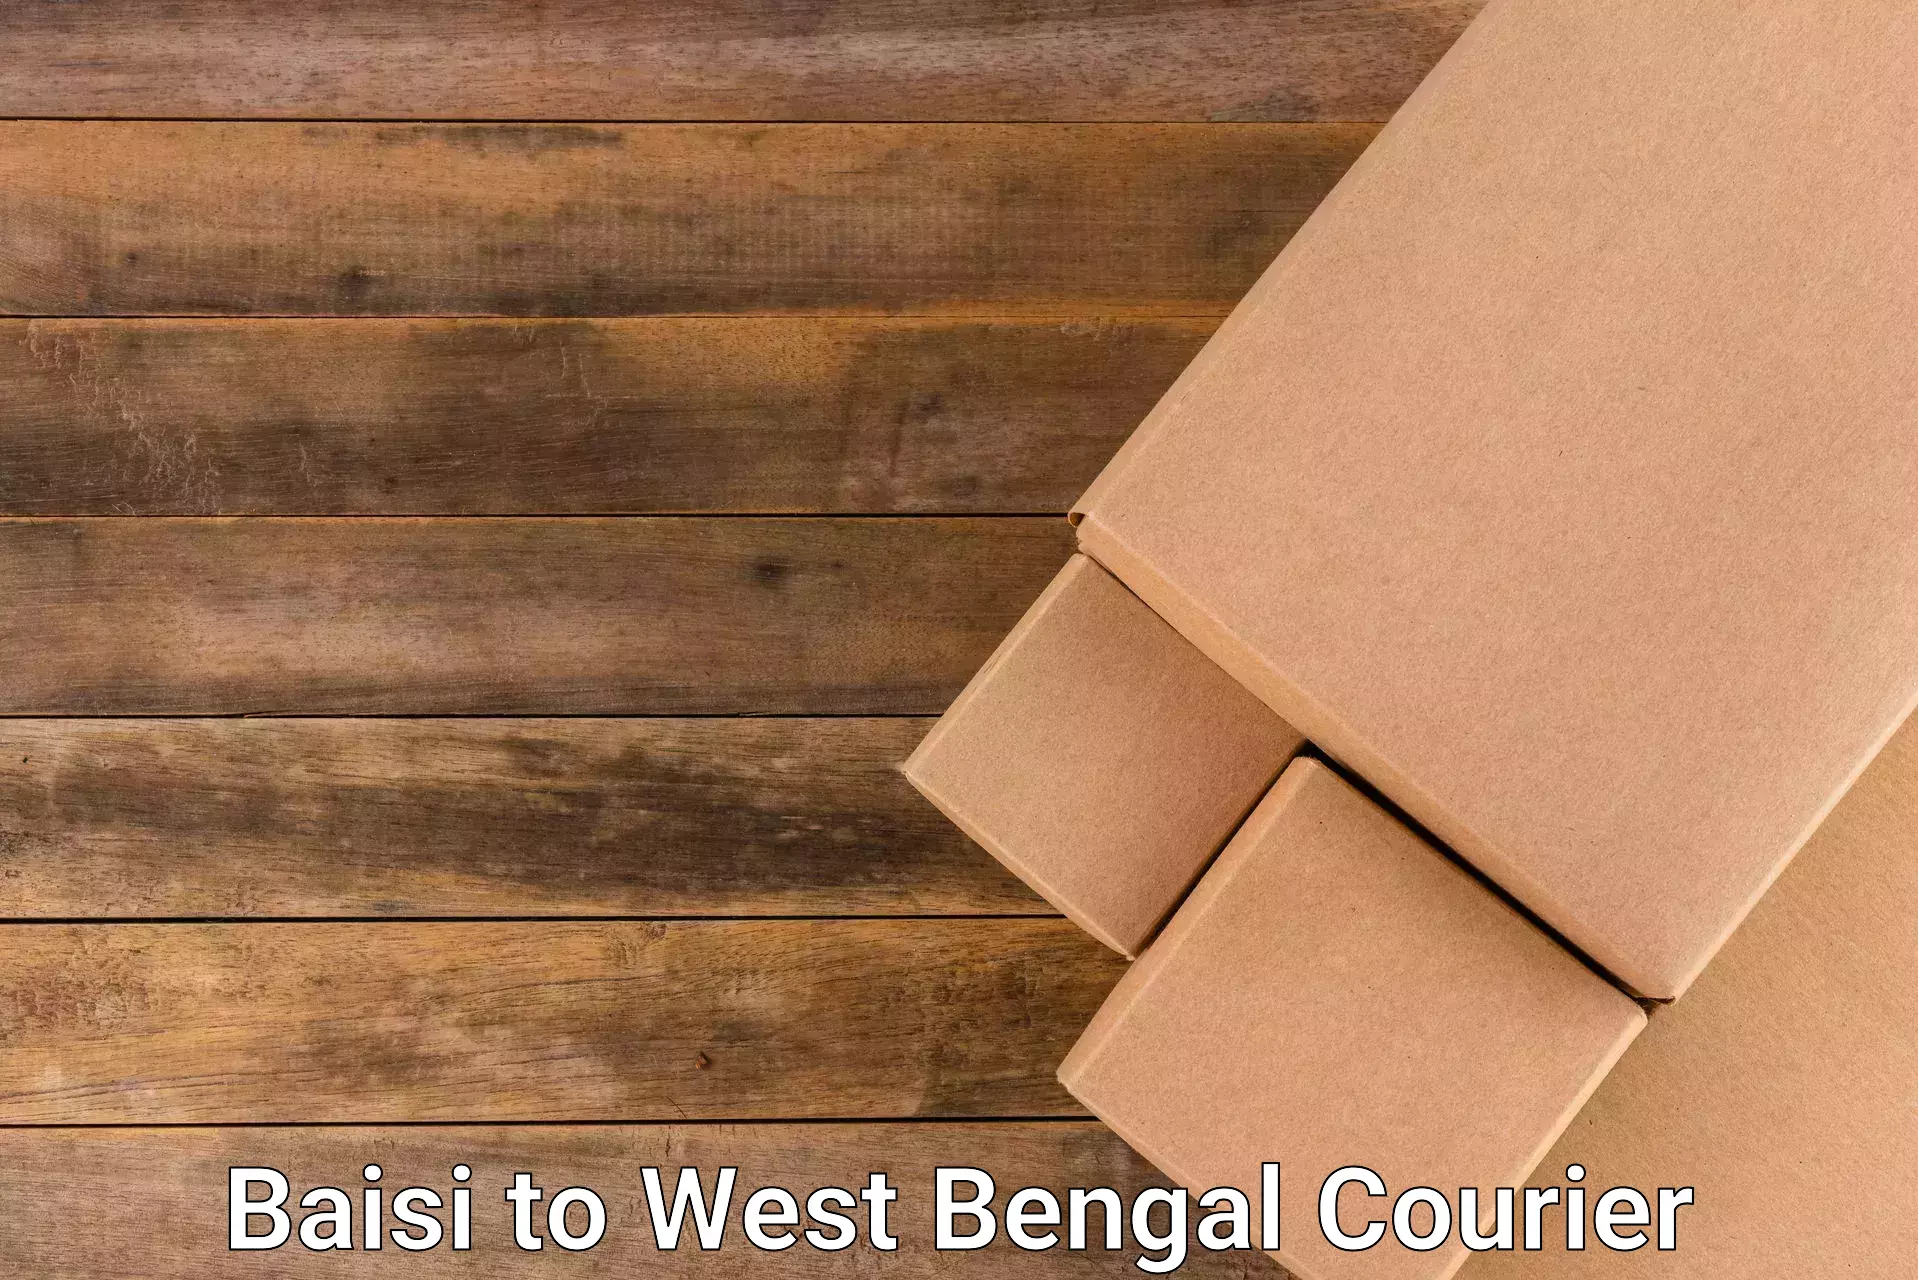 Courier service booking Baisi to Surjapur